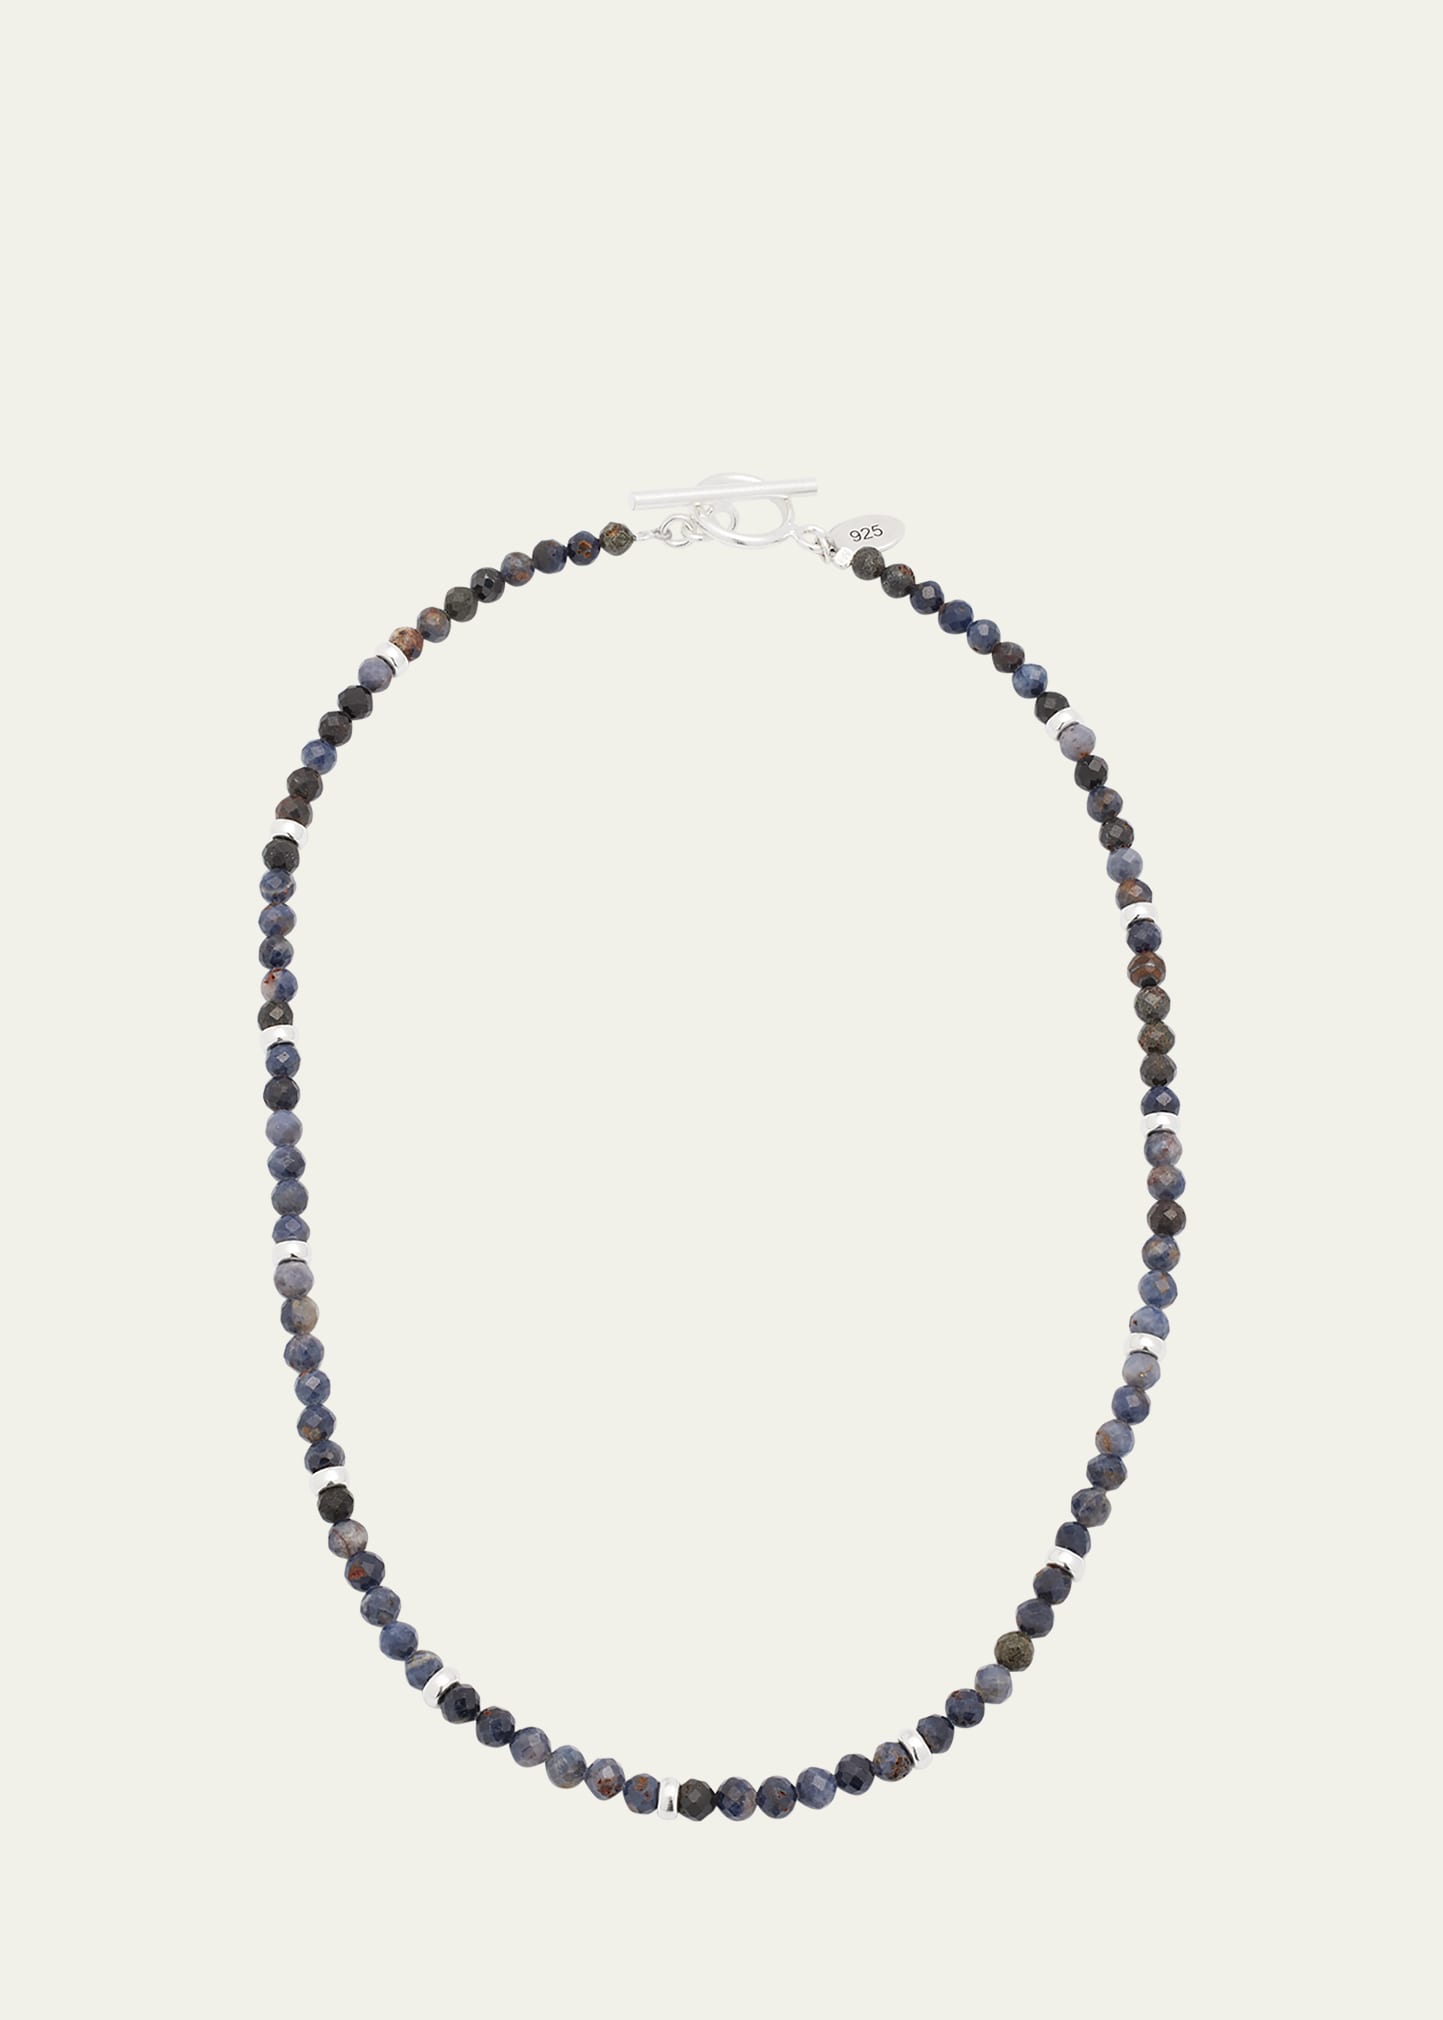 JAN LESLIE MEN'S STERLING SILVER AND SAPPHIRE BEADED NECKLACE